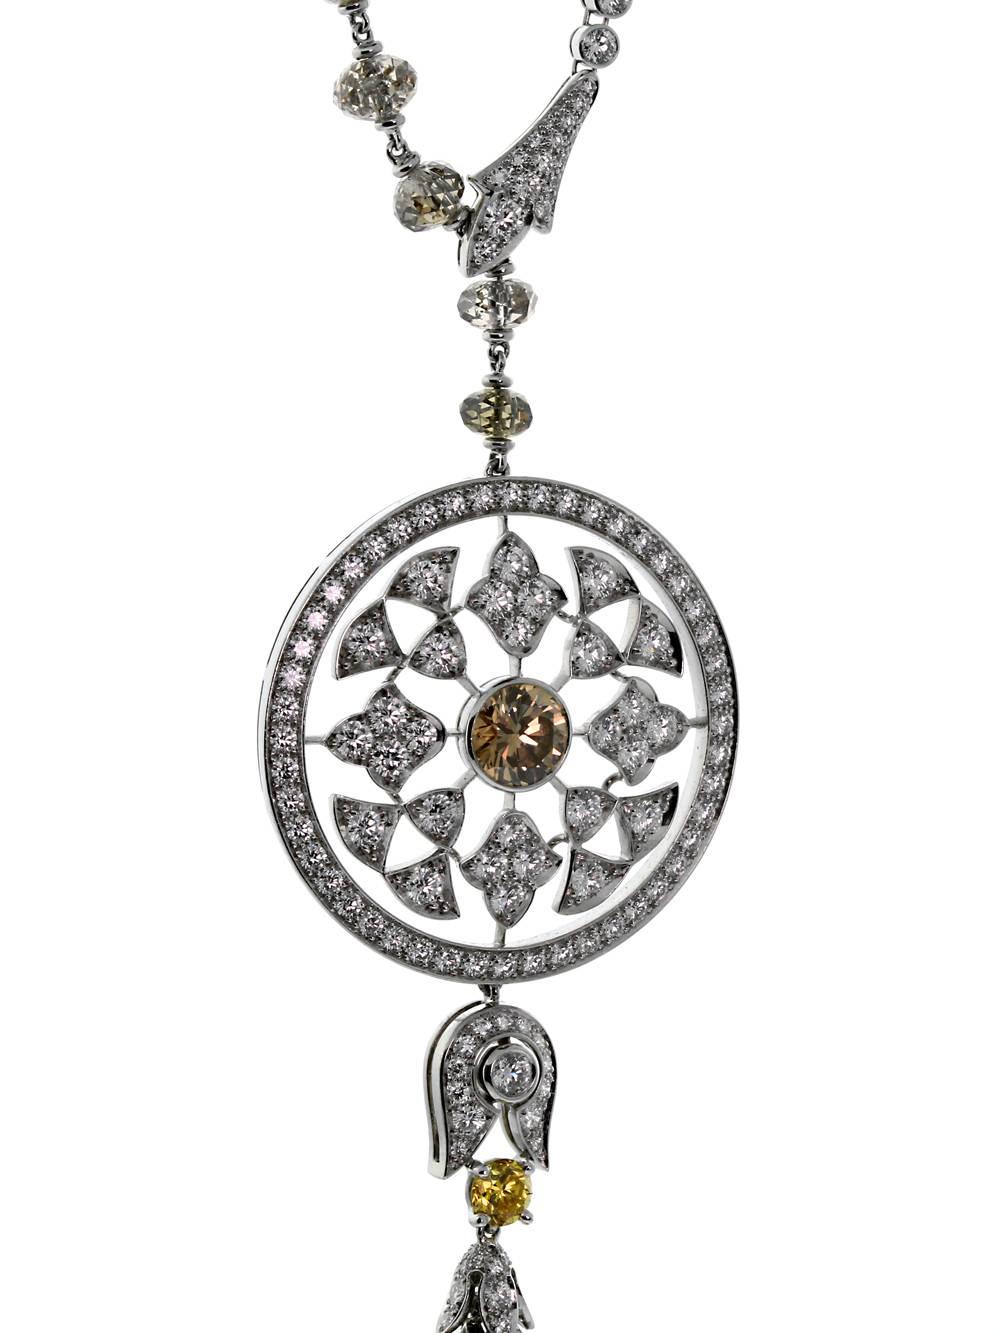 A magnificent Cartier Surya necklace lavishly set with 328 of the finest Cartier diamonds (57.98cts) in platinum. 

1 Fancy Brown Diamond Weighing 1.01ct
10 Diamond Pearl Beads 7.61ct
64 Brown Diamond Briolettes 40.9ct
1 Fancy Yellow Round